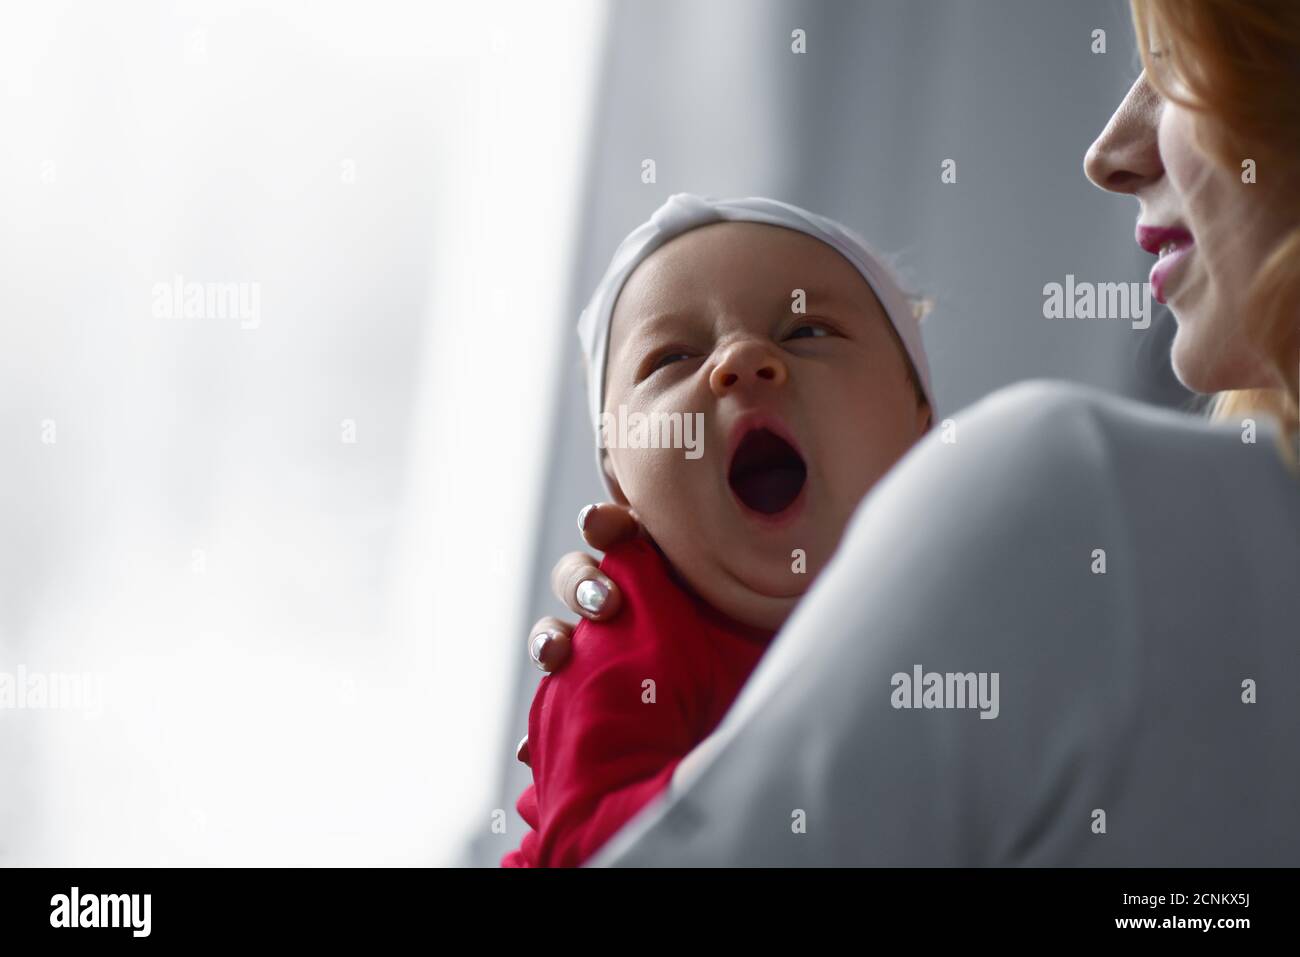 Mother holding cute newborn baby girl in her arms. Sleepy baby yawning. Stock Photo